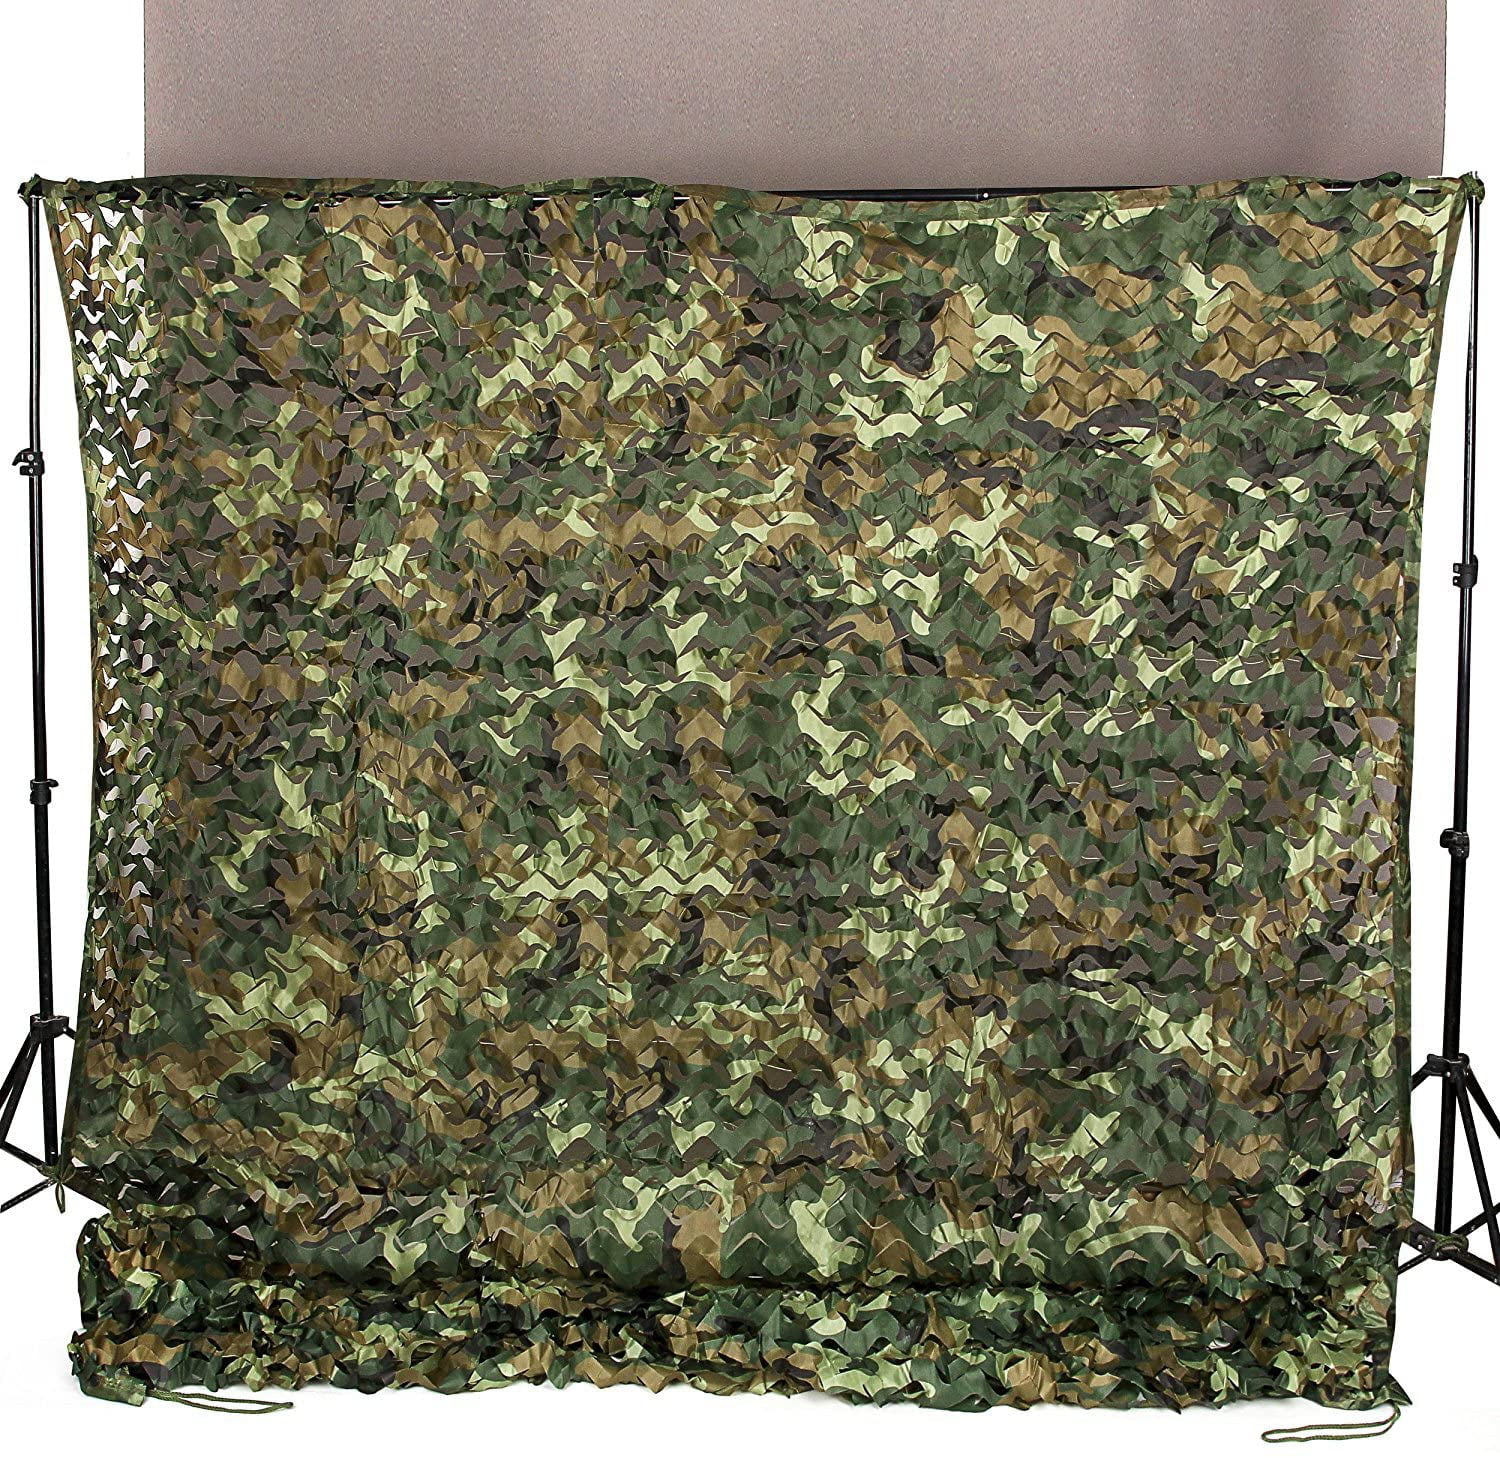 Meters Military Navy Blue Camouflage Net Ocean Camo Netting Tent Decoration UK